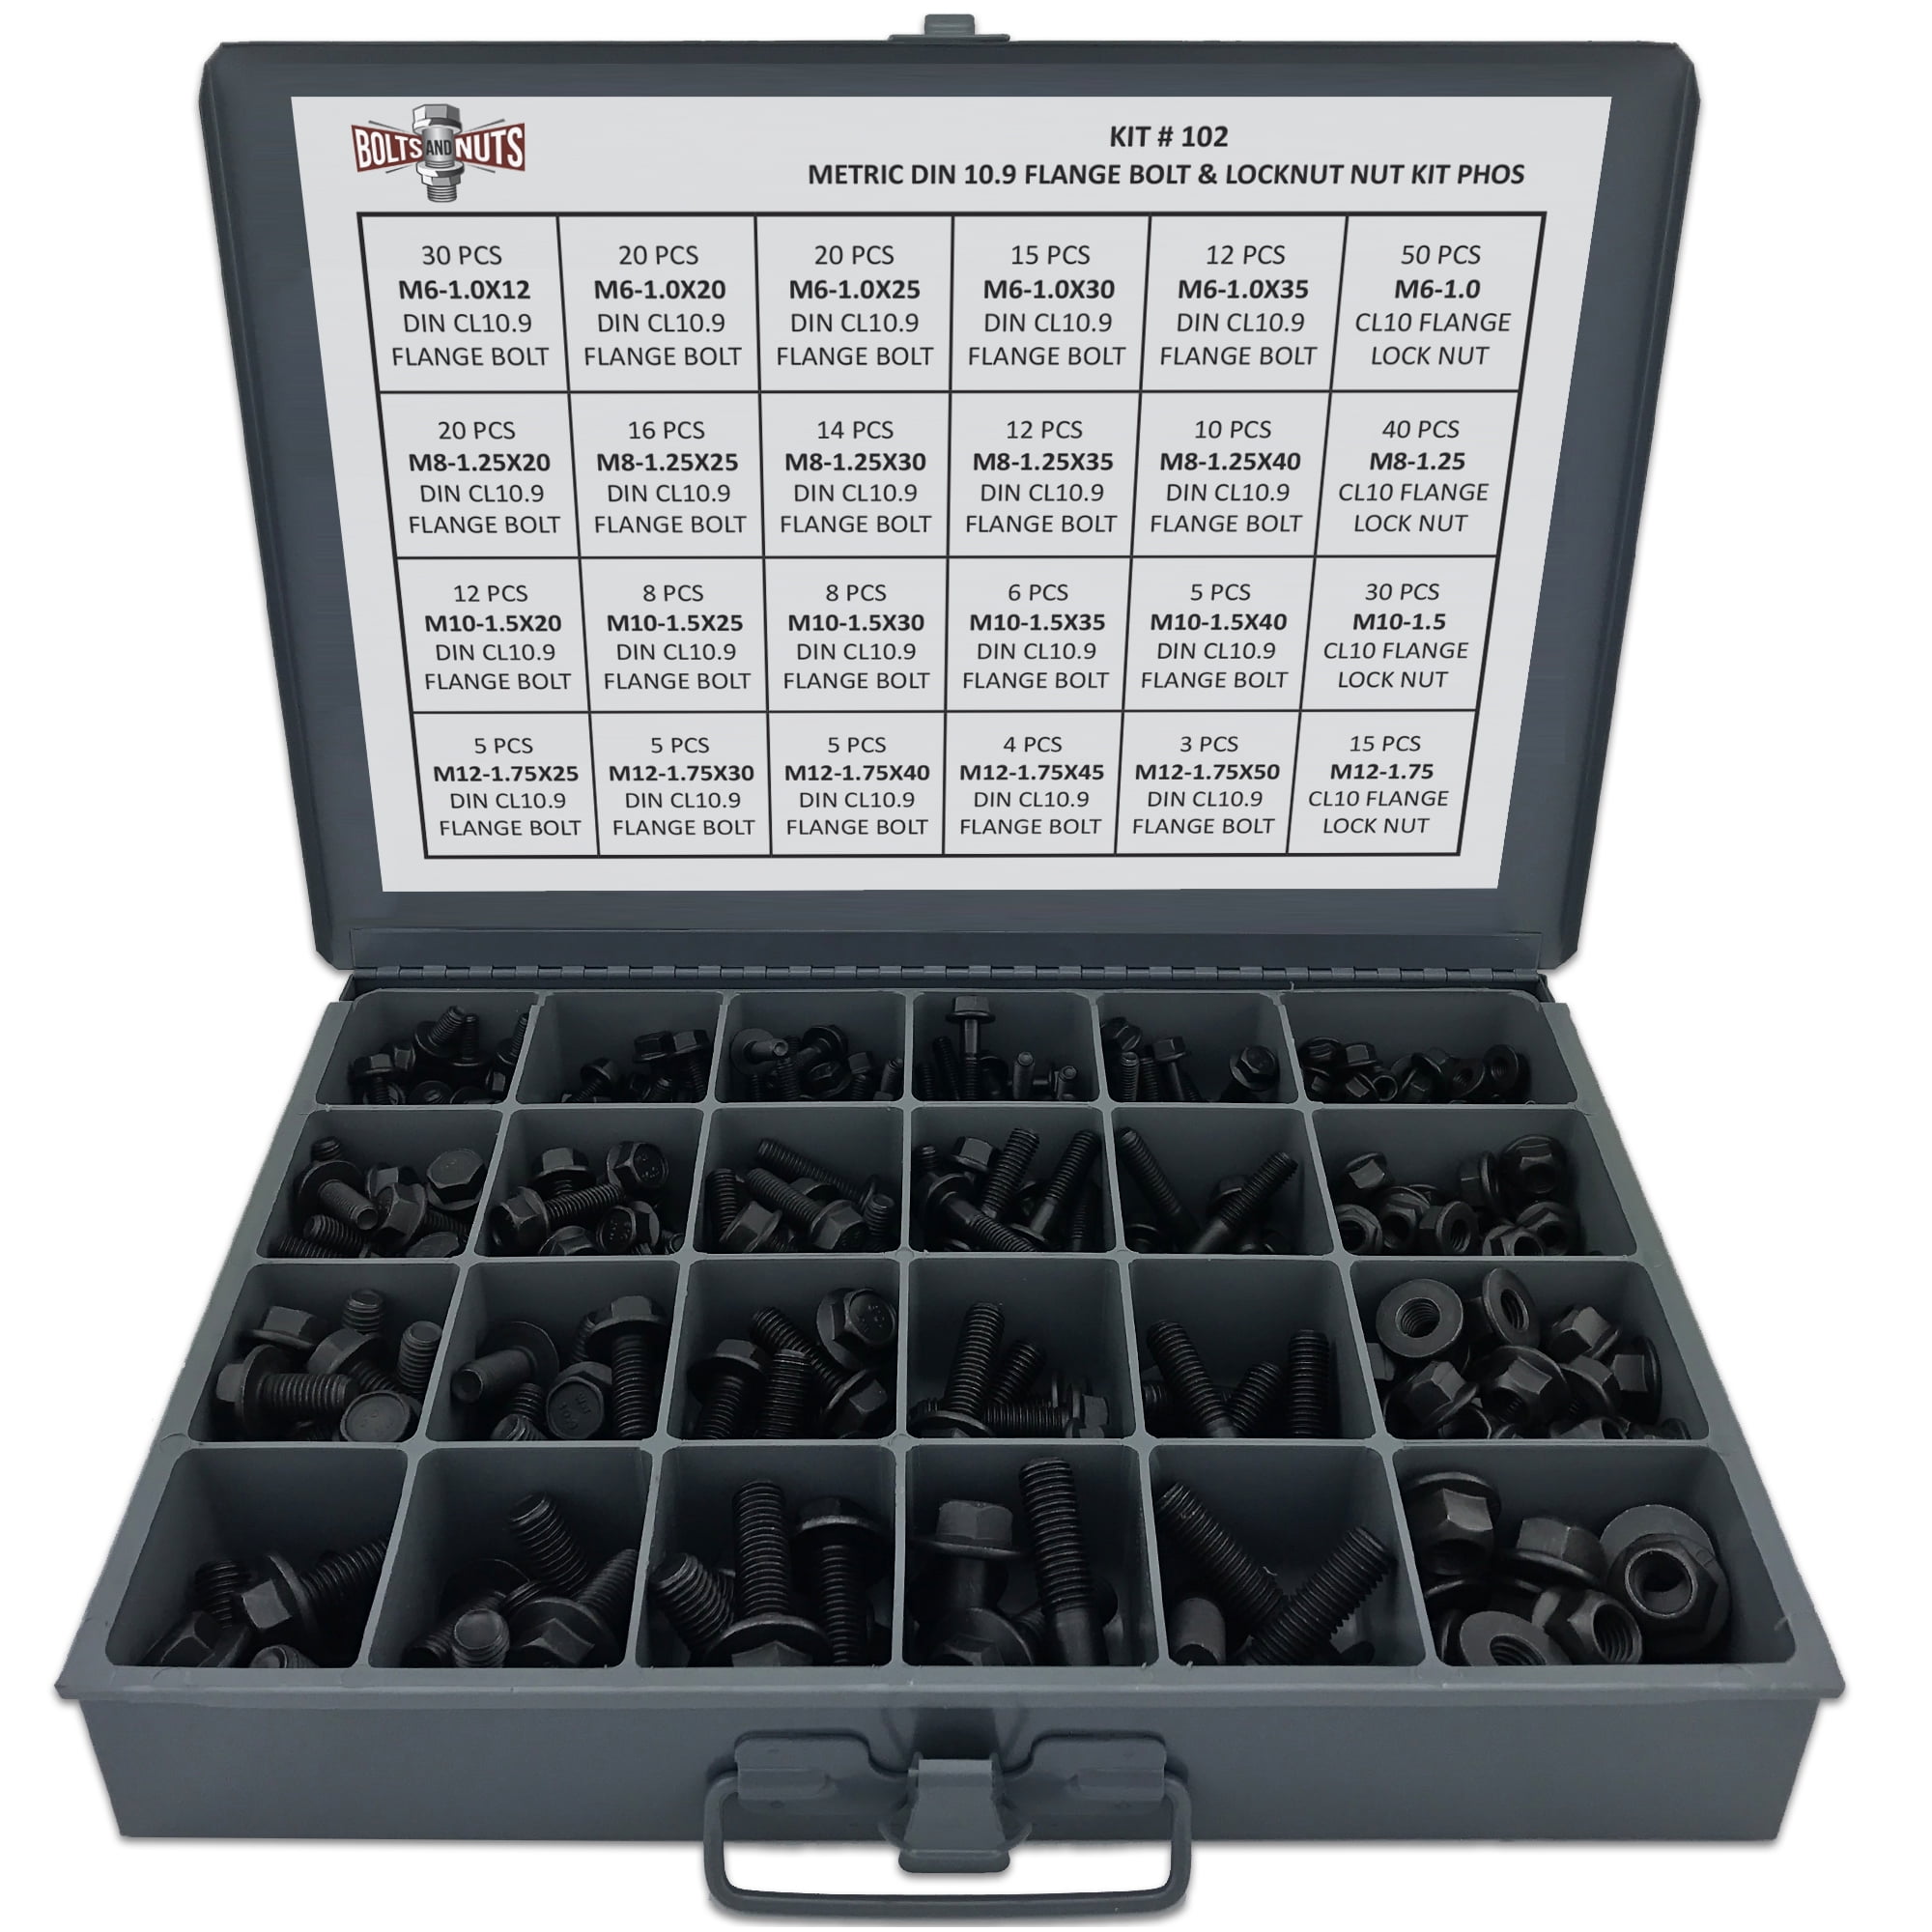 Metric Class 10.9 Hex Cap Flange Frame Bolts  Locking Flange Nuts  Assortment Kit 367 Pieces